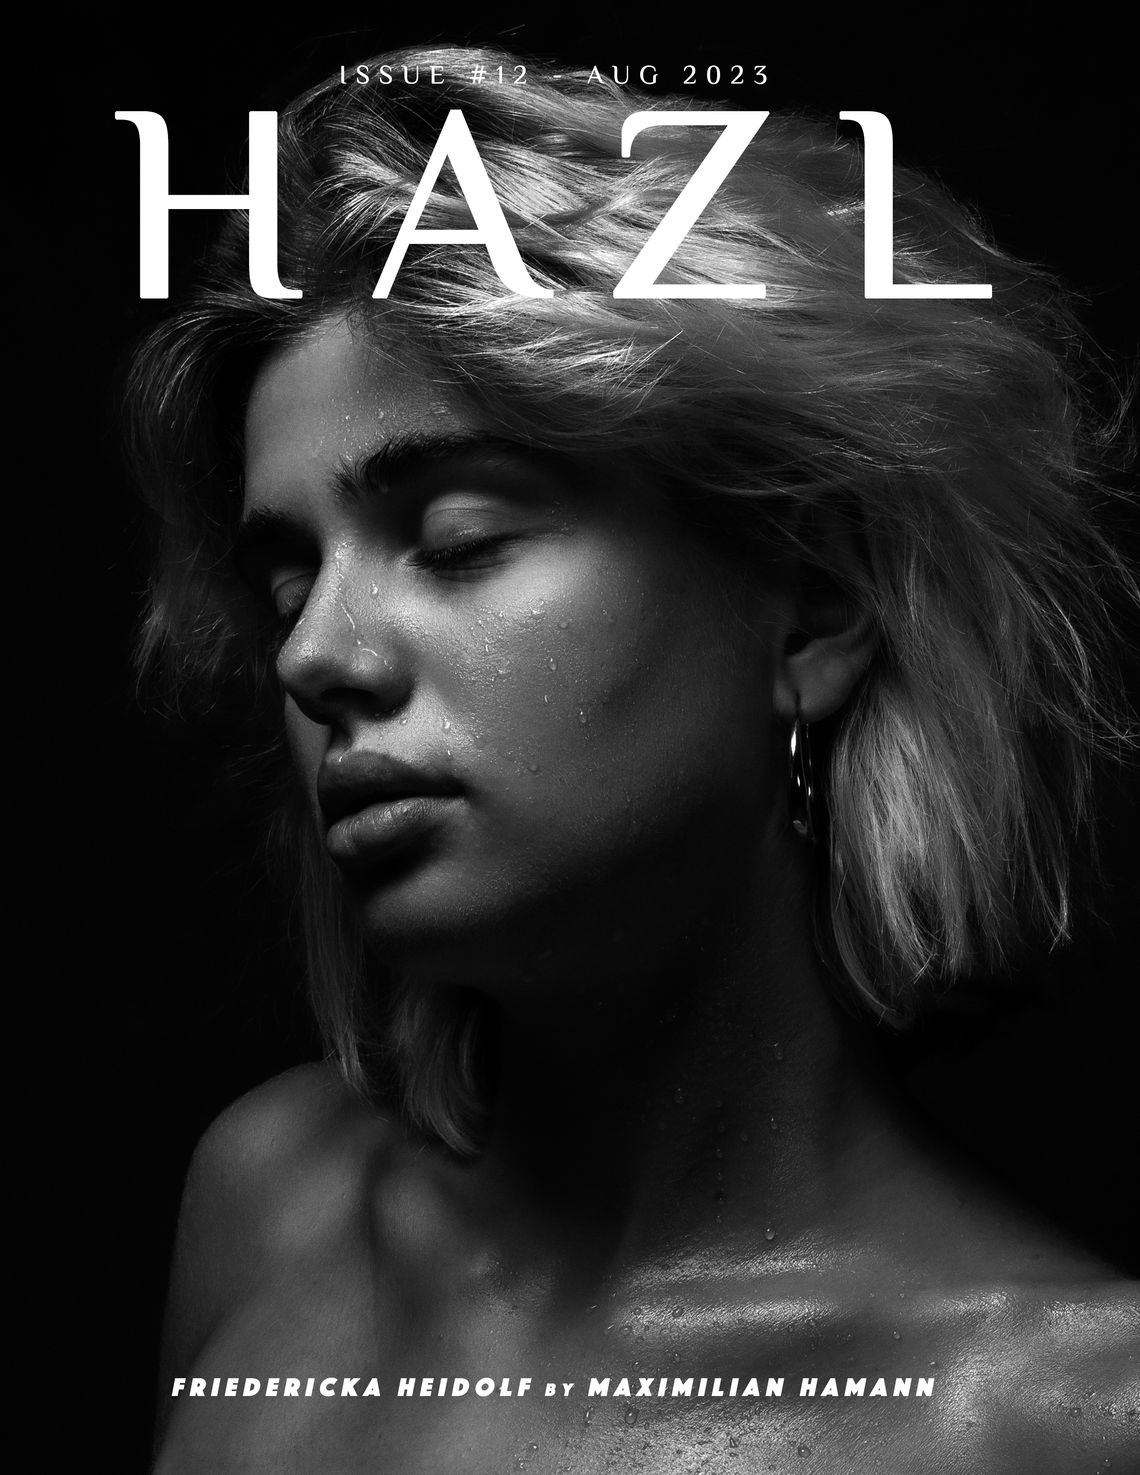 HAZL Magazine Issue #12 -  August 2023 Launched Worldwide